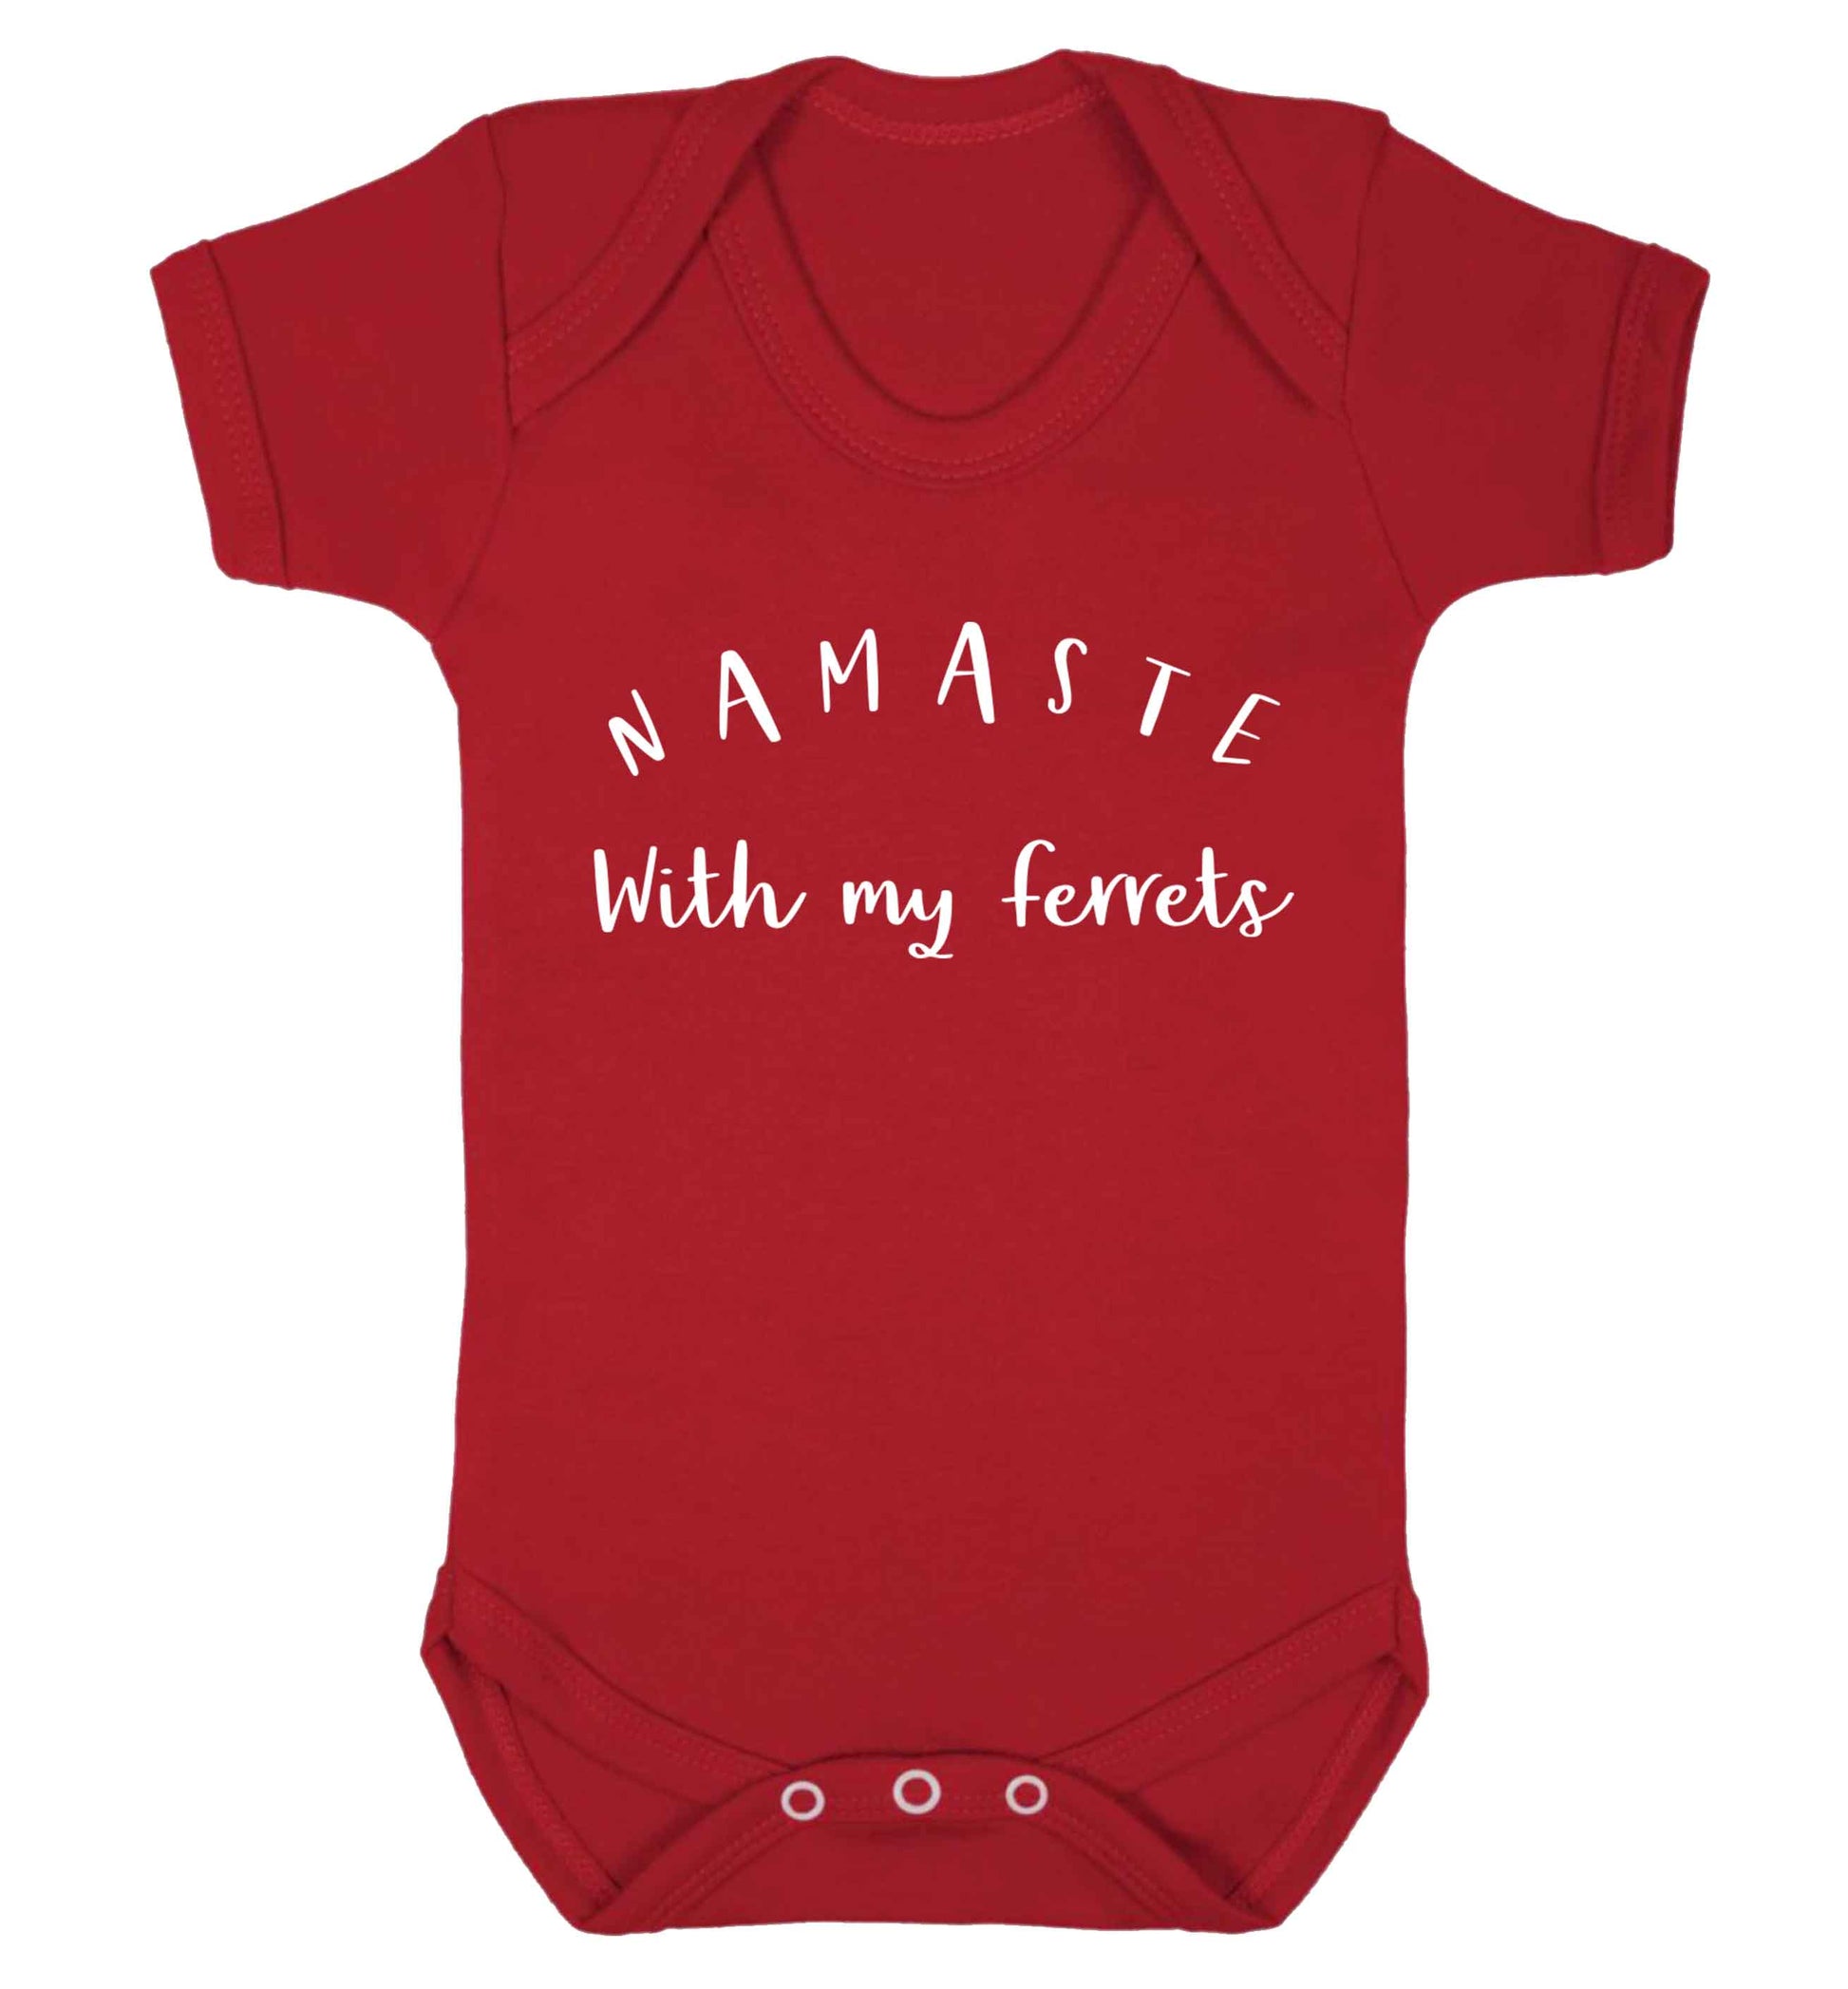 Namaste with my ferrets Baby Vest red 18-24 months